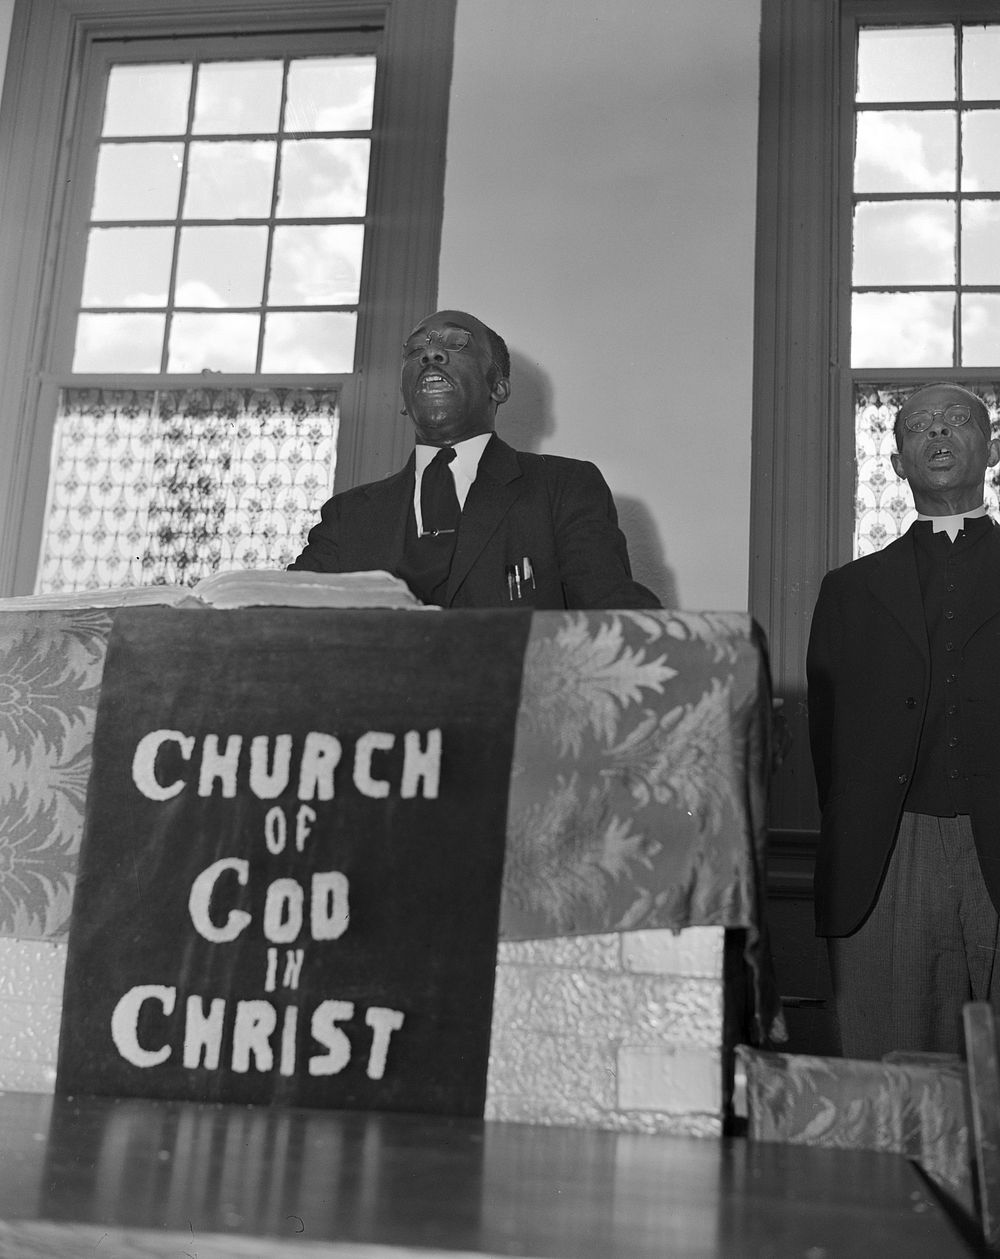 Washington, D.C. Elder Kelsey, pastor of the Church of God in Christ, opening a service with a song. Sourced from the…